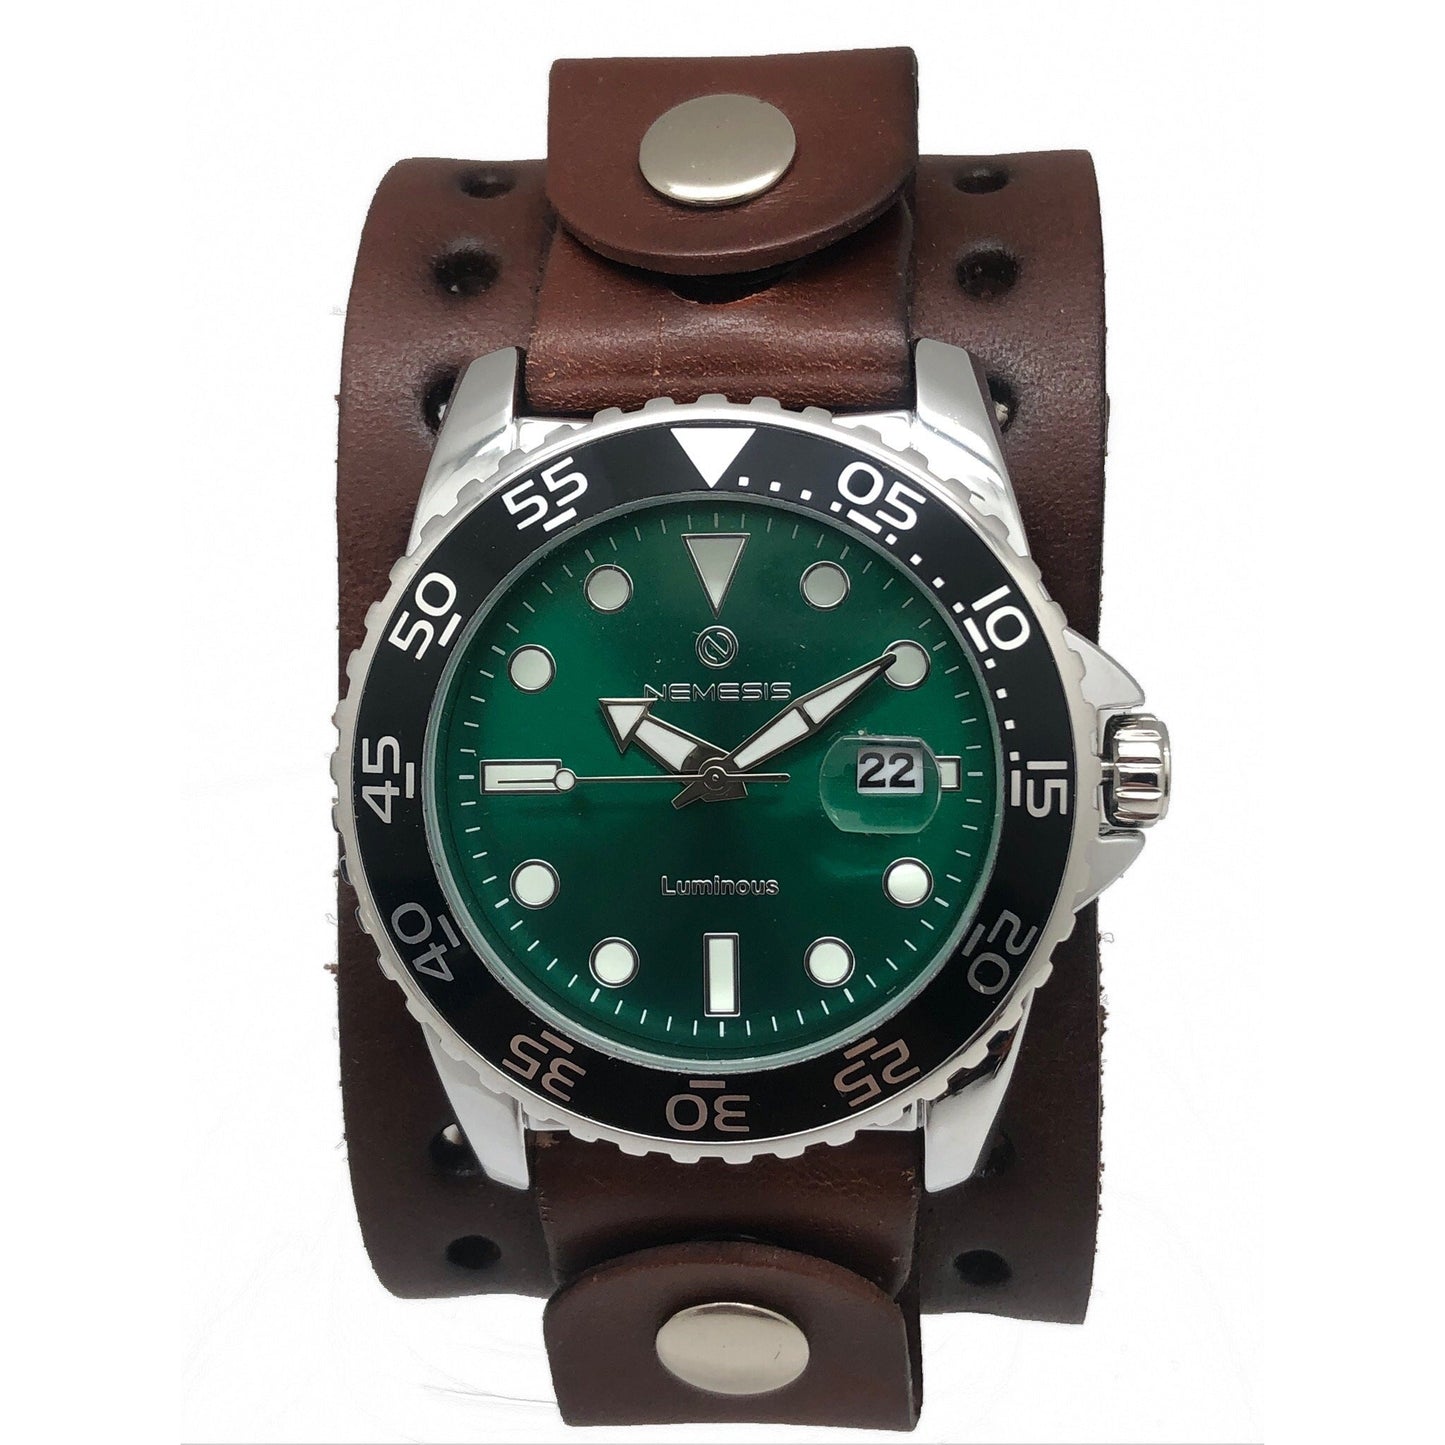 Moonwalker Luminous Green Diver with Perforated Brown Leather Cuff